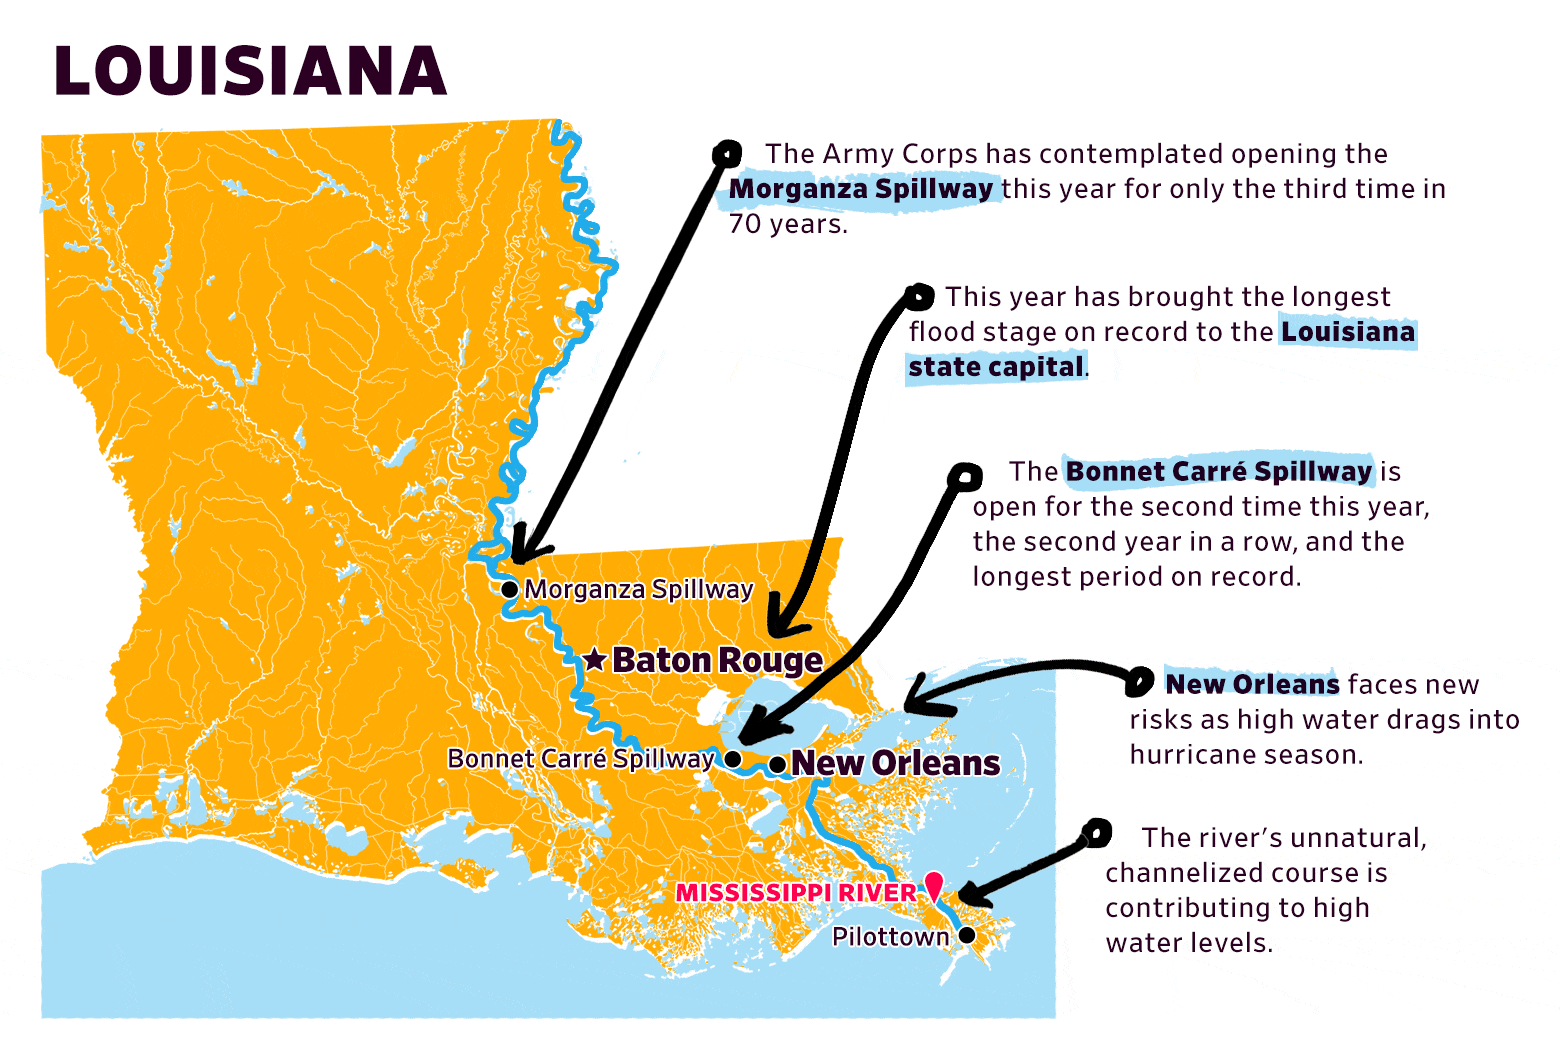 A map of Louisiana with key places like the Morganza and Bonnet Carré spillways pointed out.